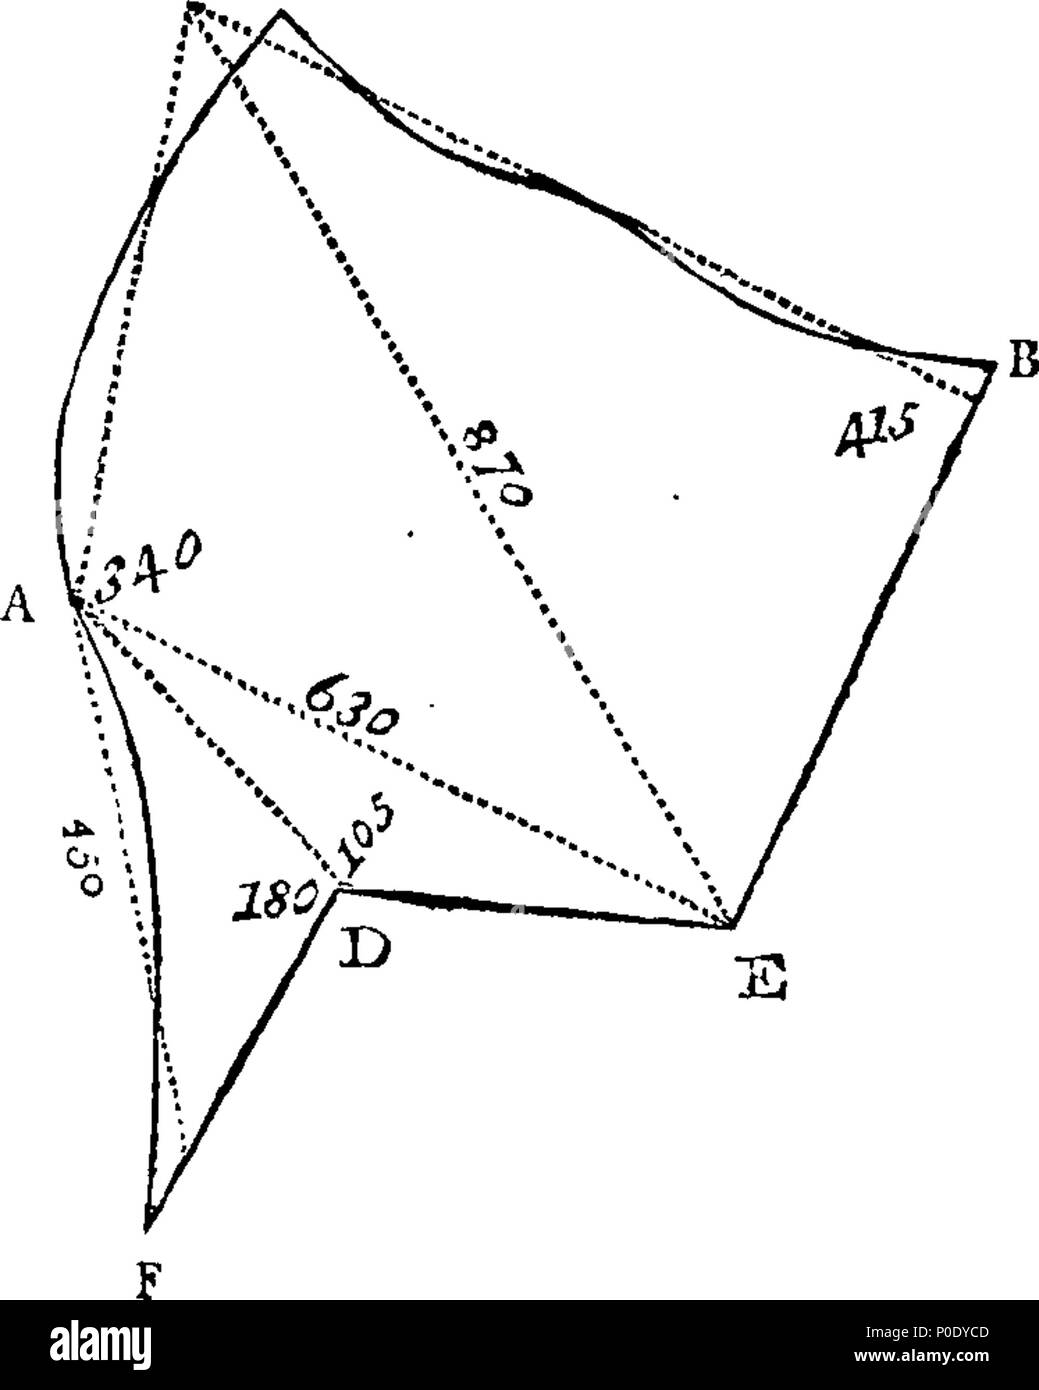 . English: Fleuron from book: A treatise on land-surveying, in six parts. Part I. Contains Definitions and Problems in Geometry. Part II. Rules for finding the Content of Land without using a Chain, but by stepping the dimensions, by which any Husbandman who knows the first five Rules of Arithmetic may find the Content of his own work. Part III. To survey with the Chain and Cross. Part IV. To survey with the Chain only. Part V. Rules for parting off any given portion of a Field, in form of a Triangle, Square or Parallelogram. Part VI. A full explanation of the method used by the most eminent S Stock Photo